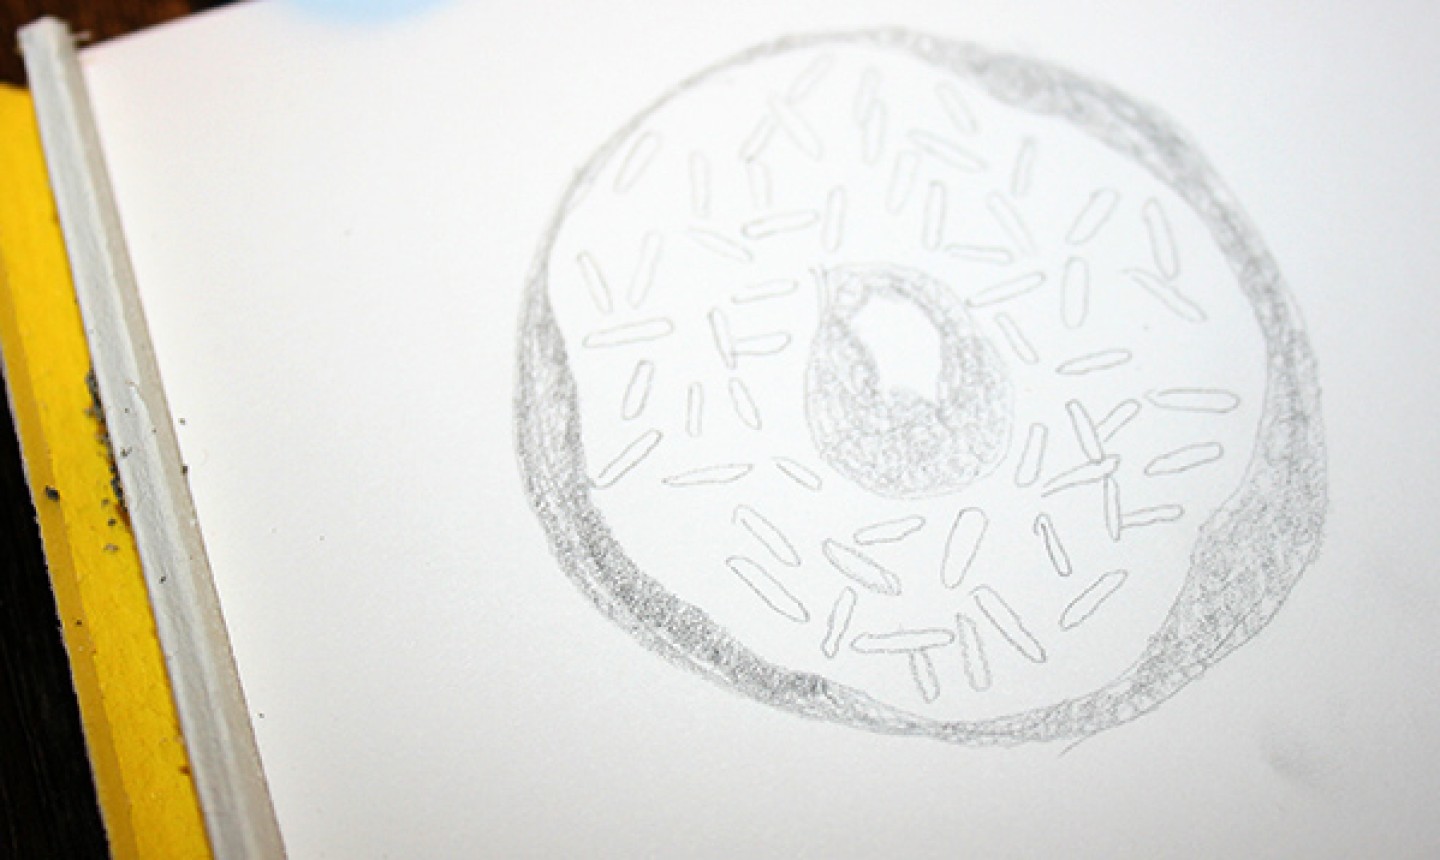 Sketch of a donut